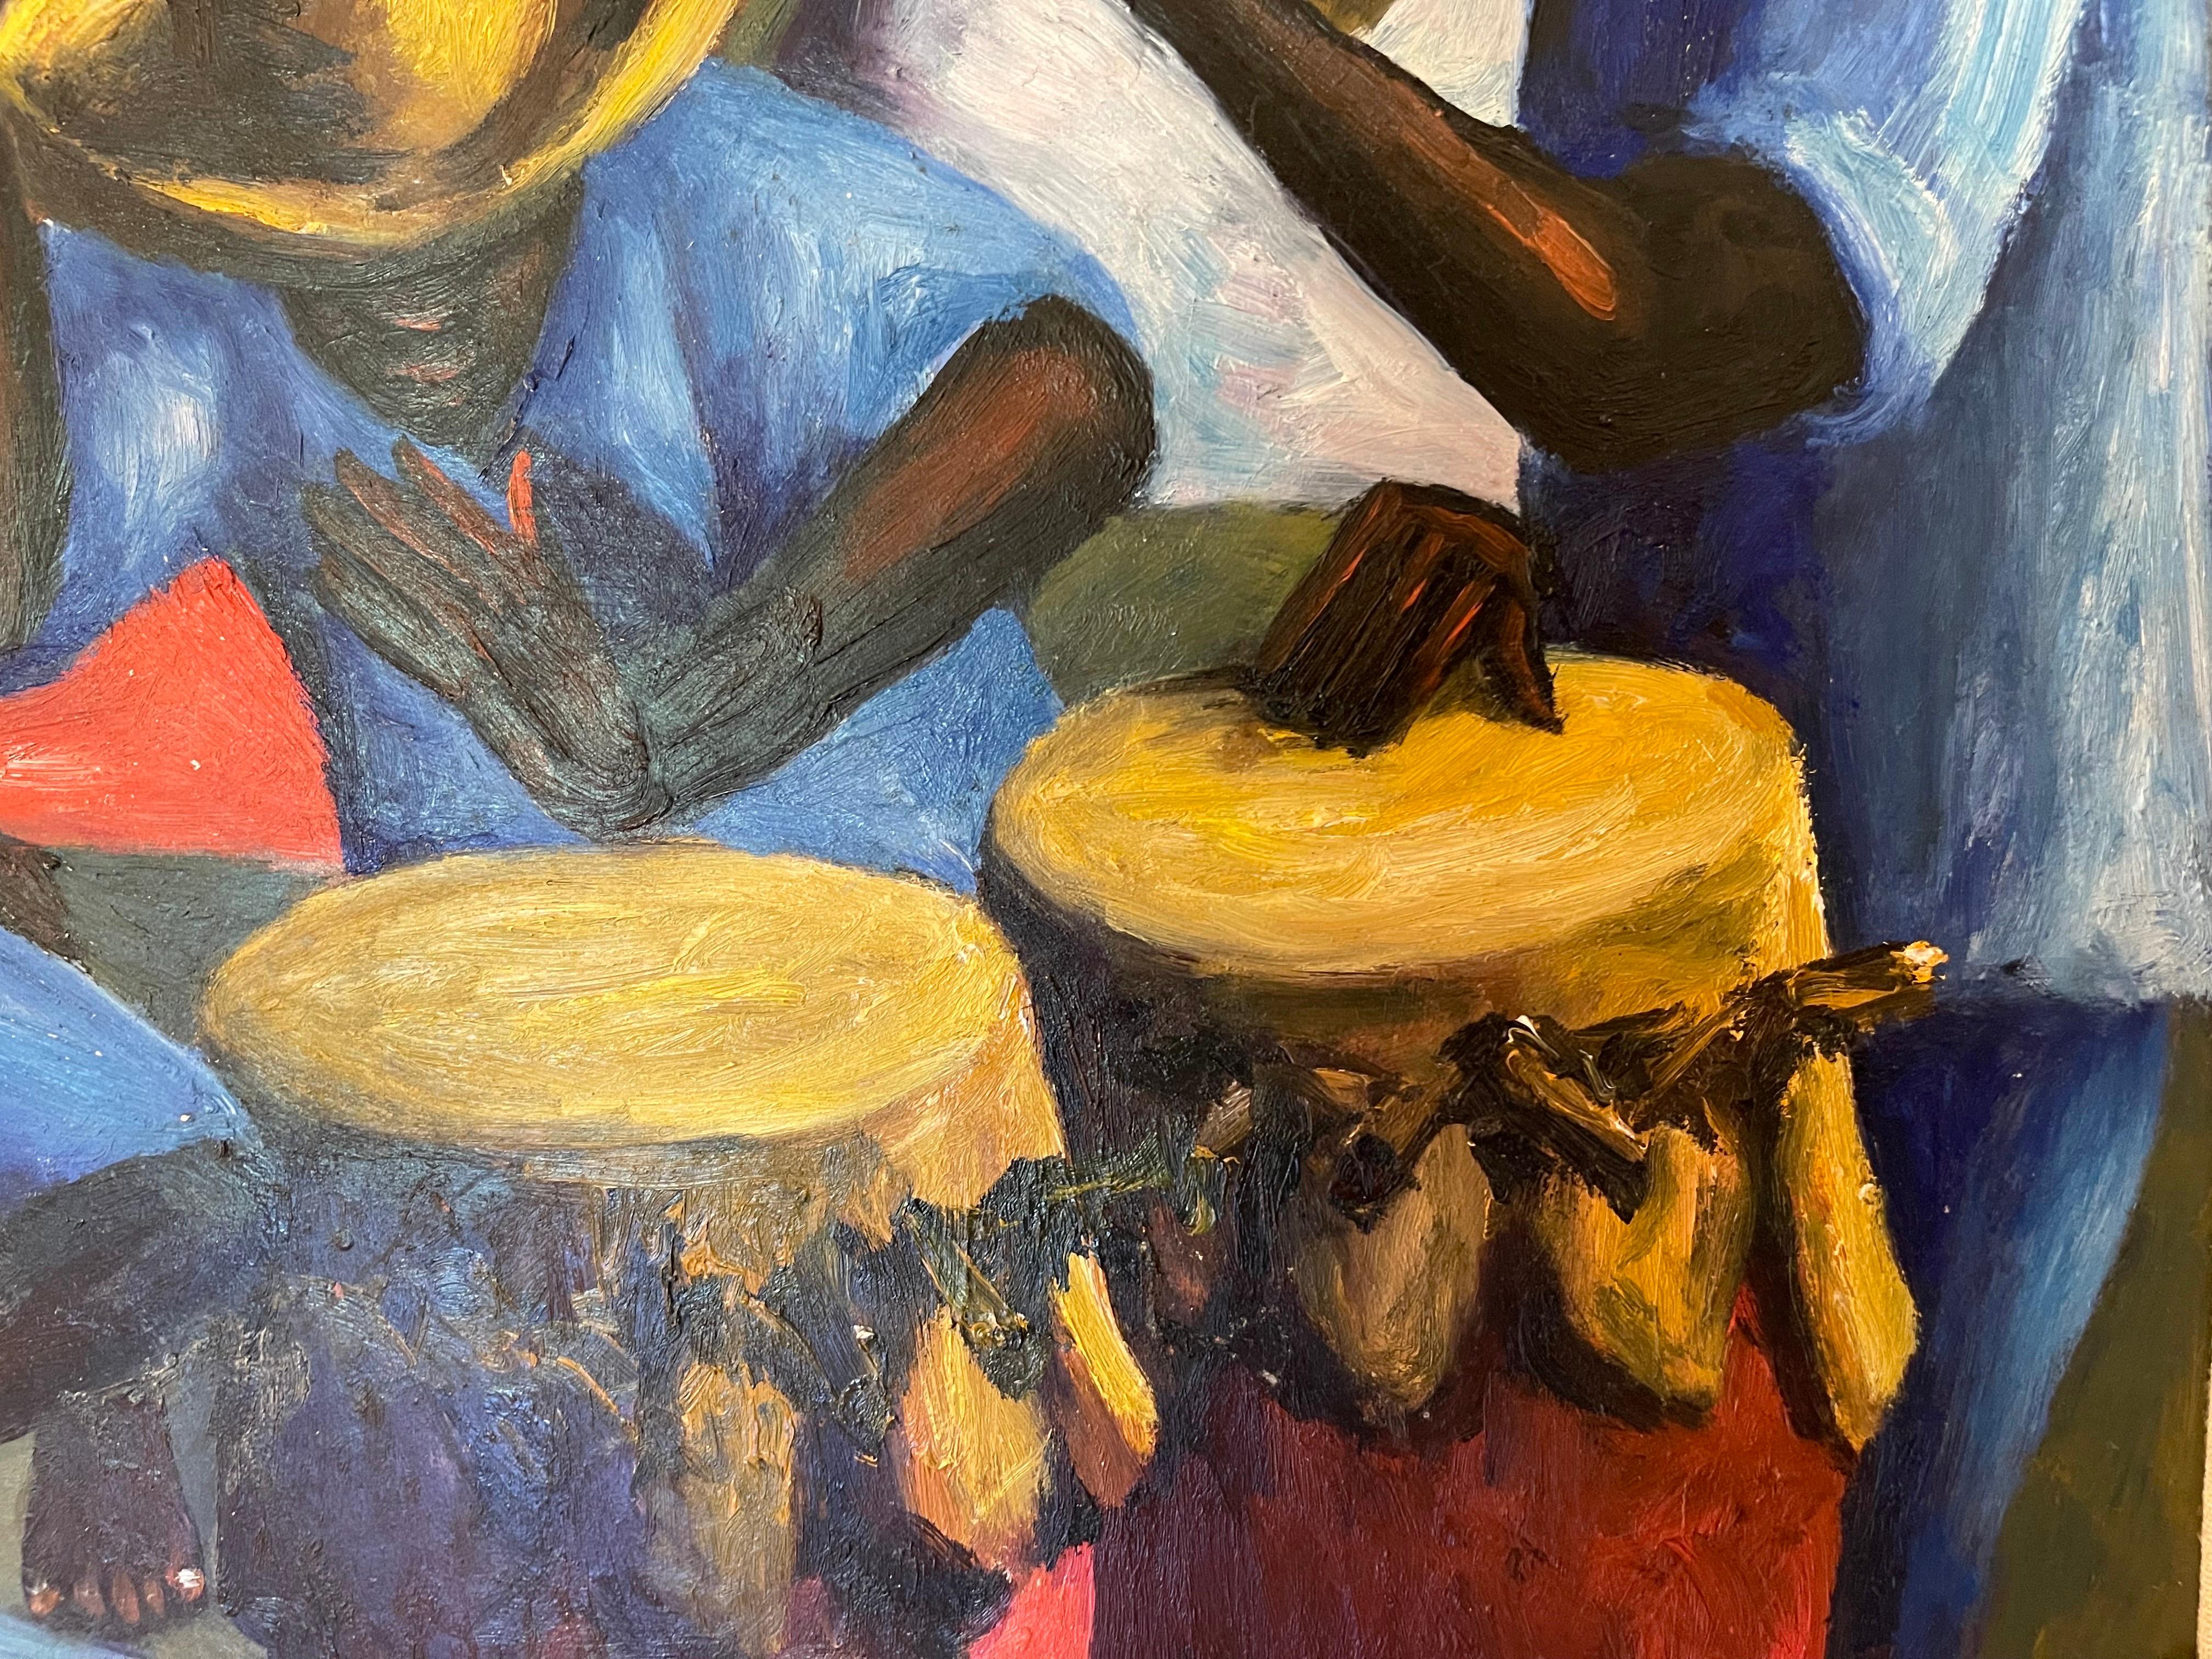 Wood 1956 Haiti Drummers and Dancers by Xaviar Amiana Painting For Sale